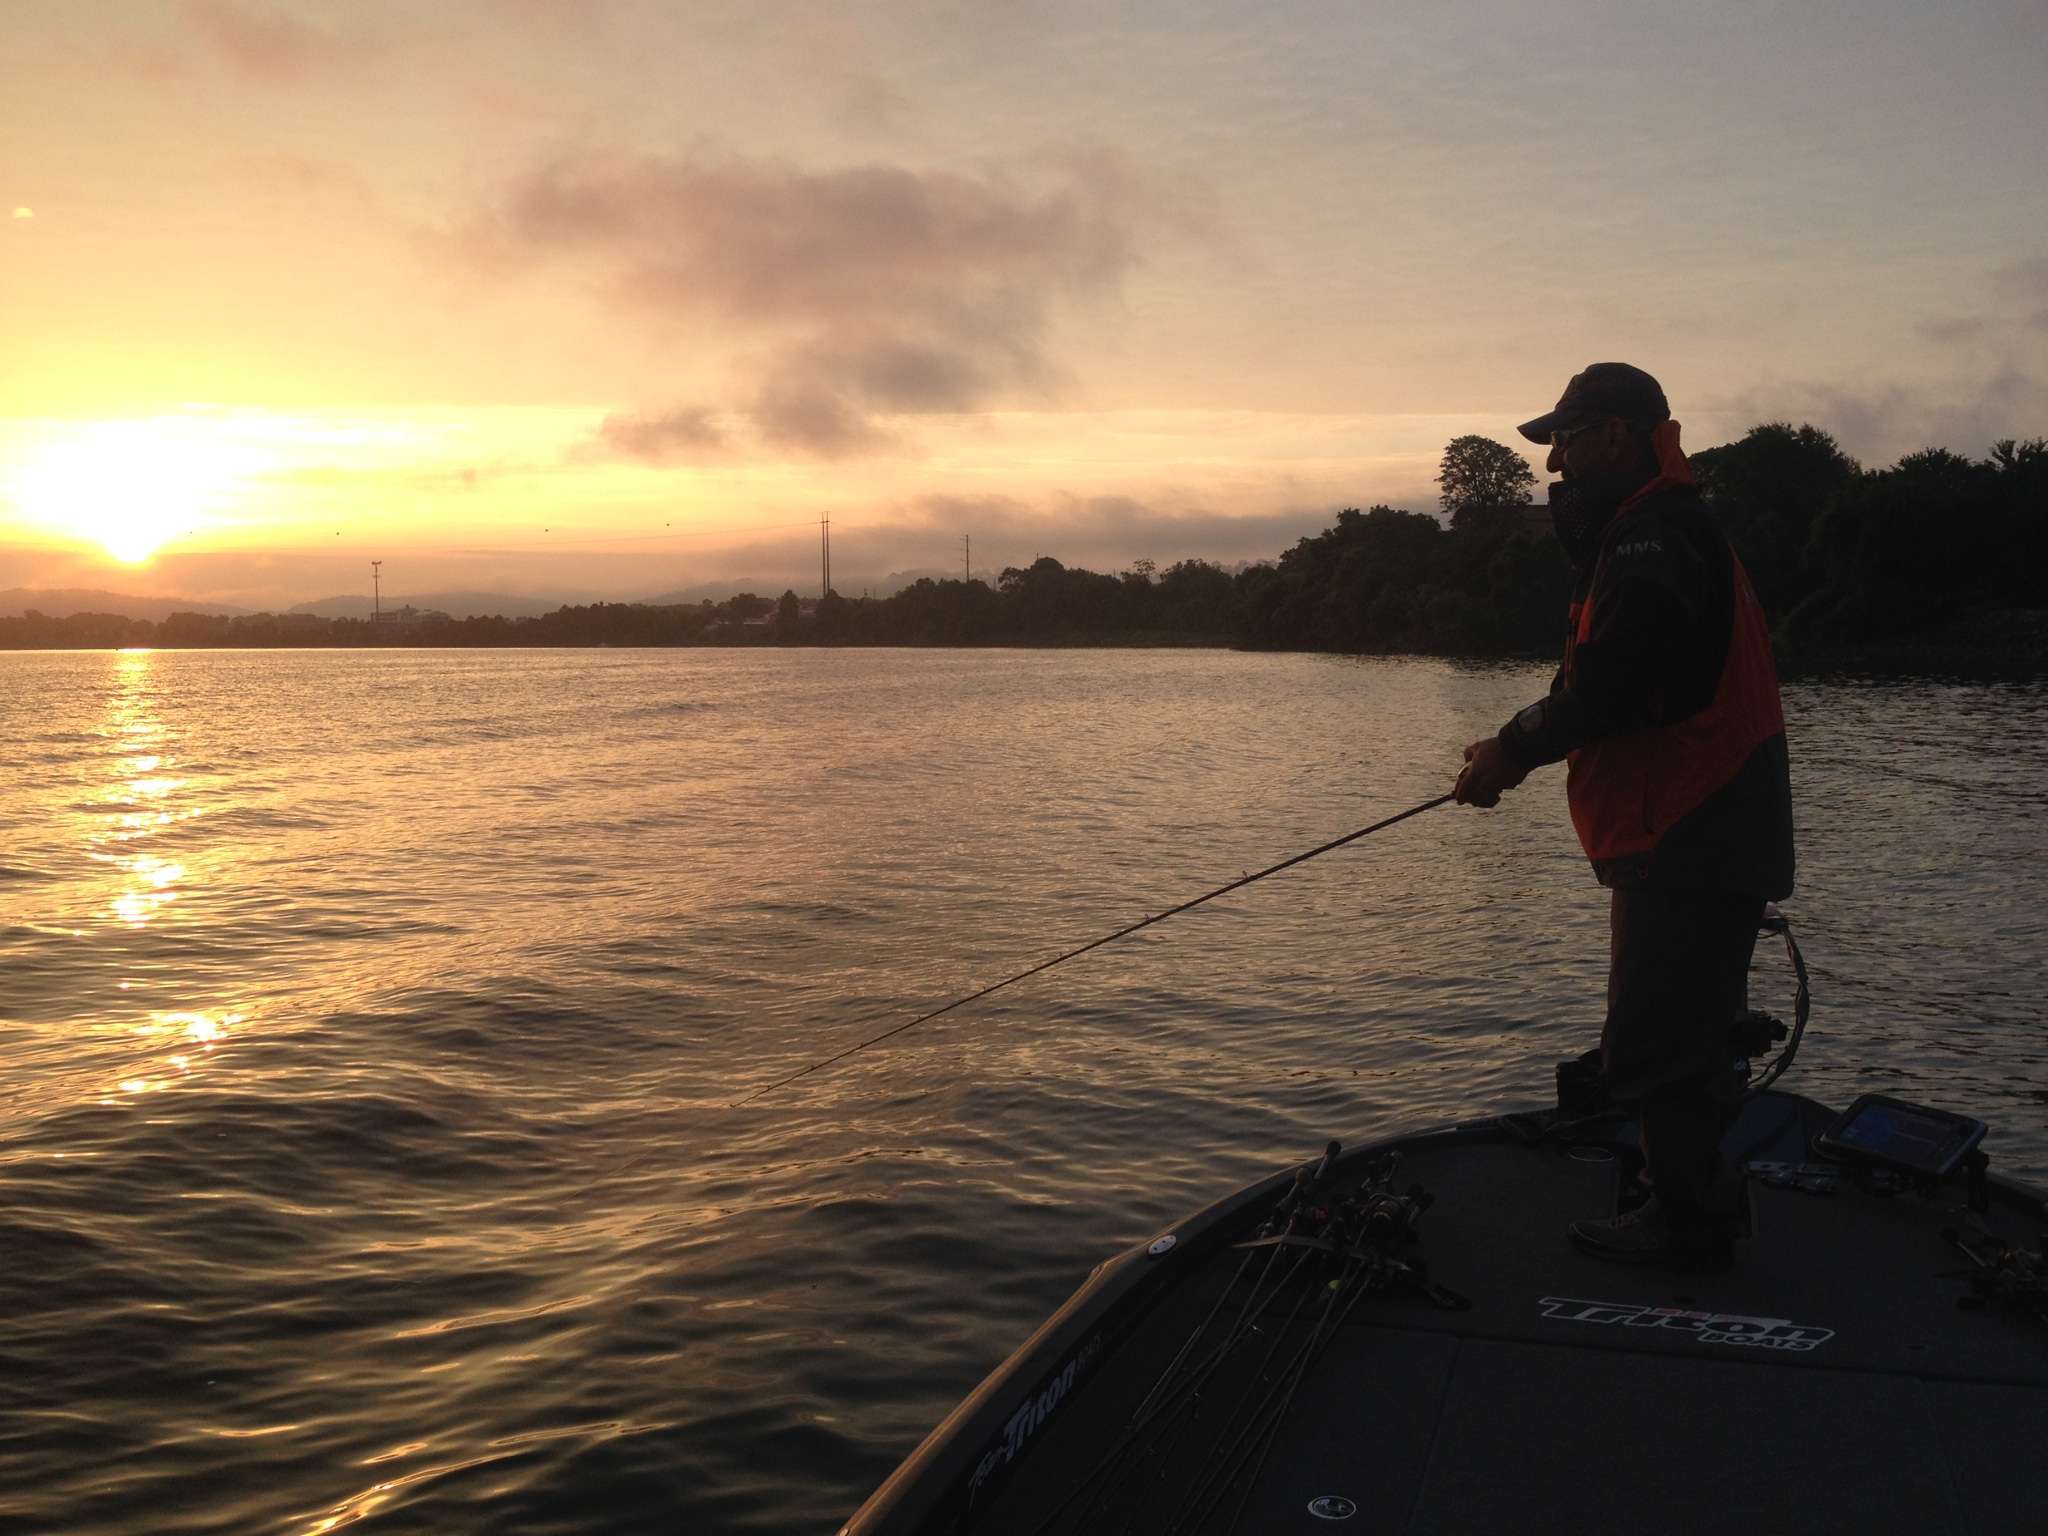 Paul Elias and the sun, both up early. Photo by Bassmaster Marshal Avery Neely